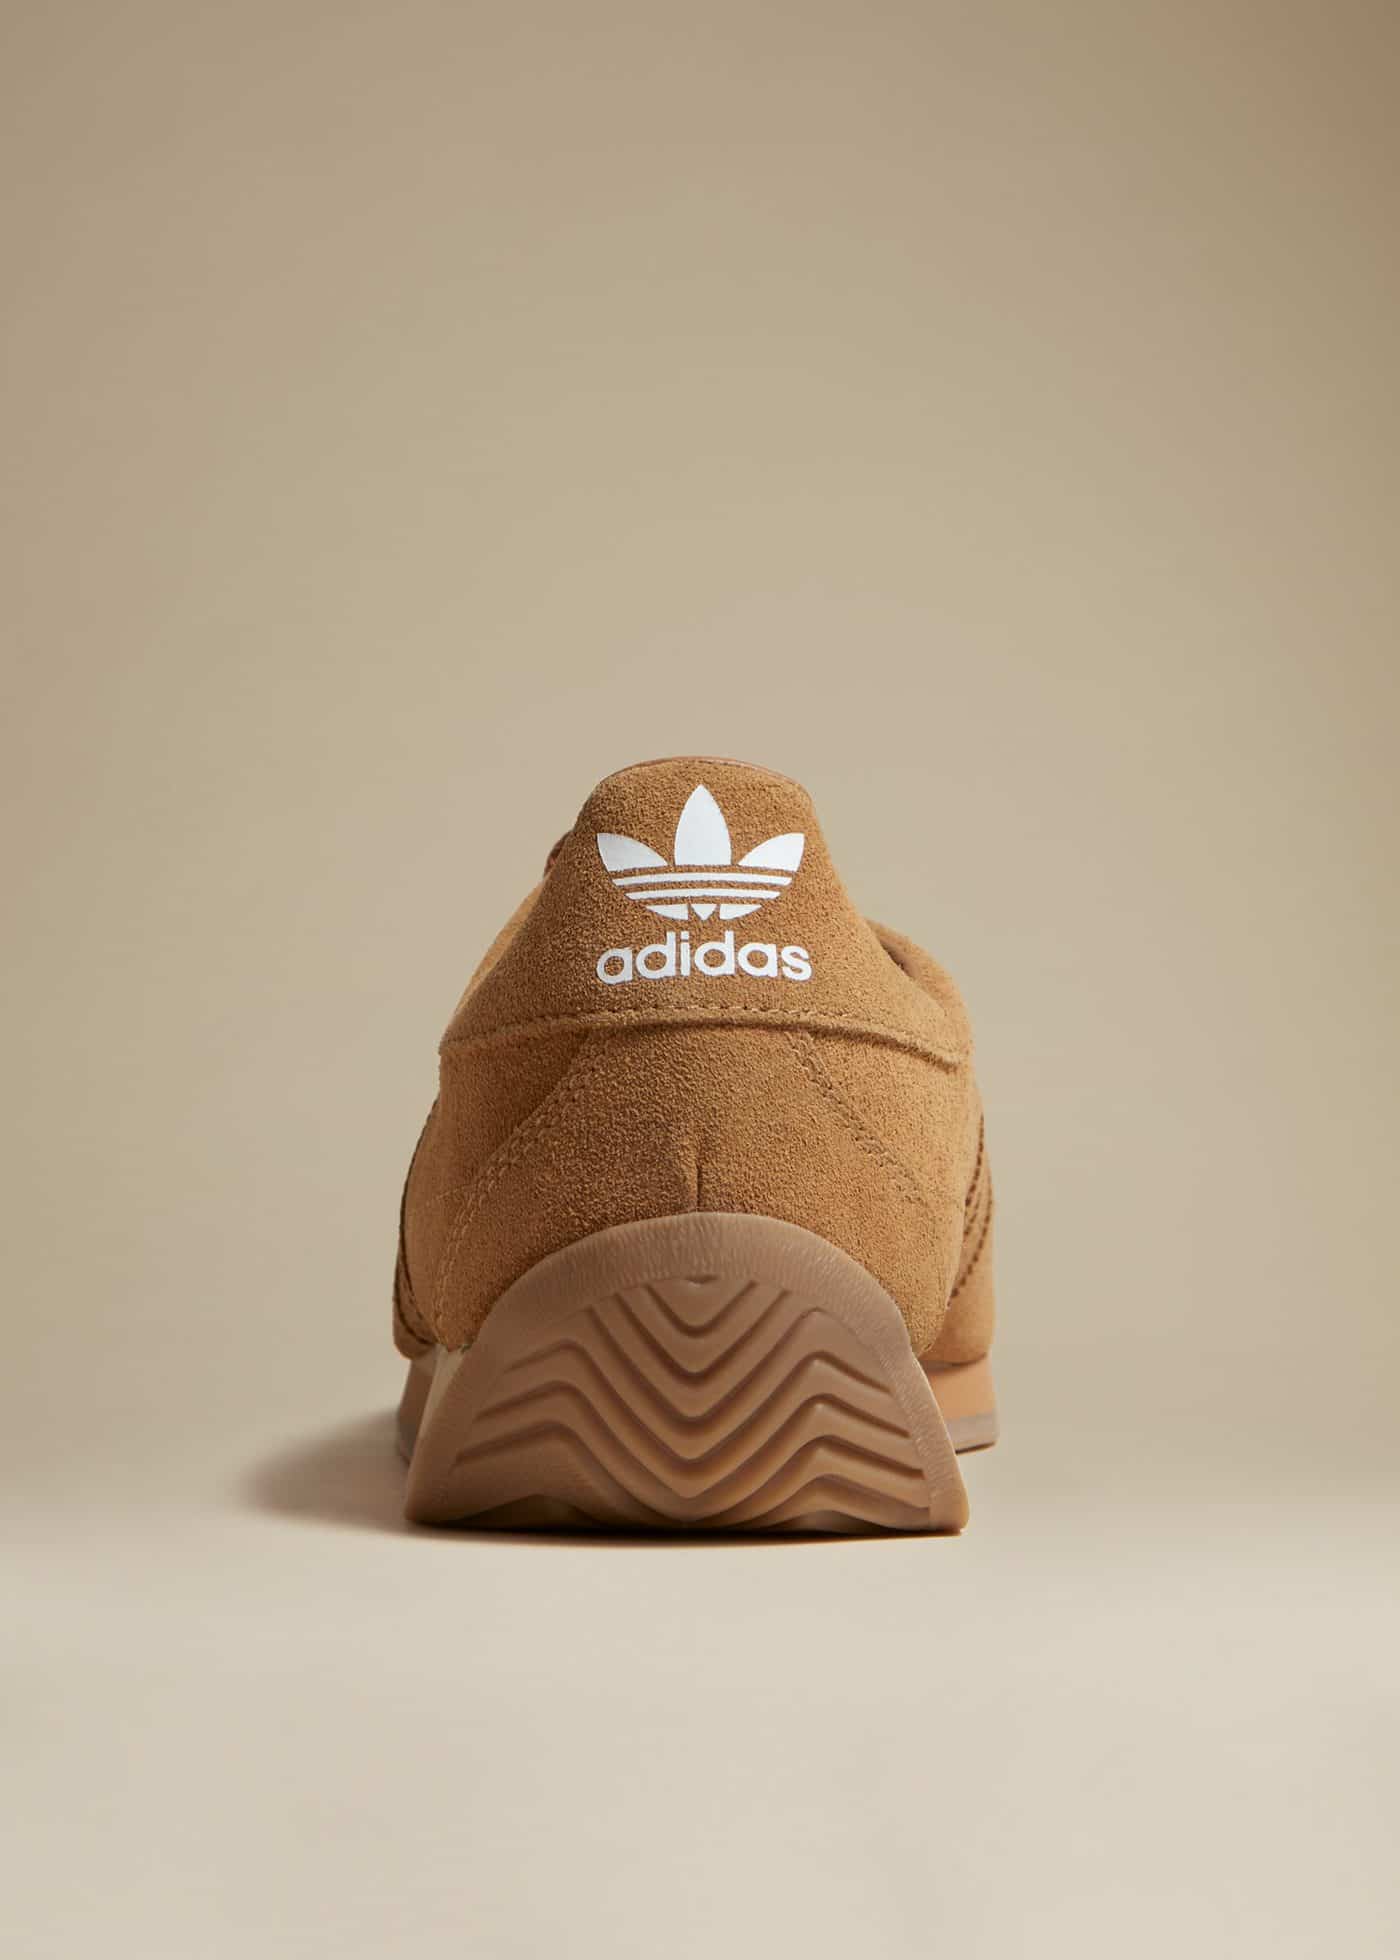 Sweat Chicly! KHAITE x Adidas Originals Team Up To Release The Most Stylish  Sneaker In Town - Daily Front Row